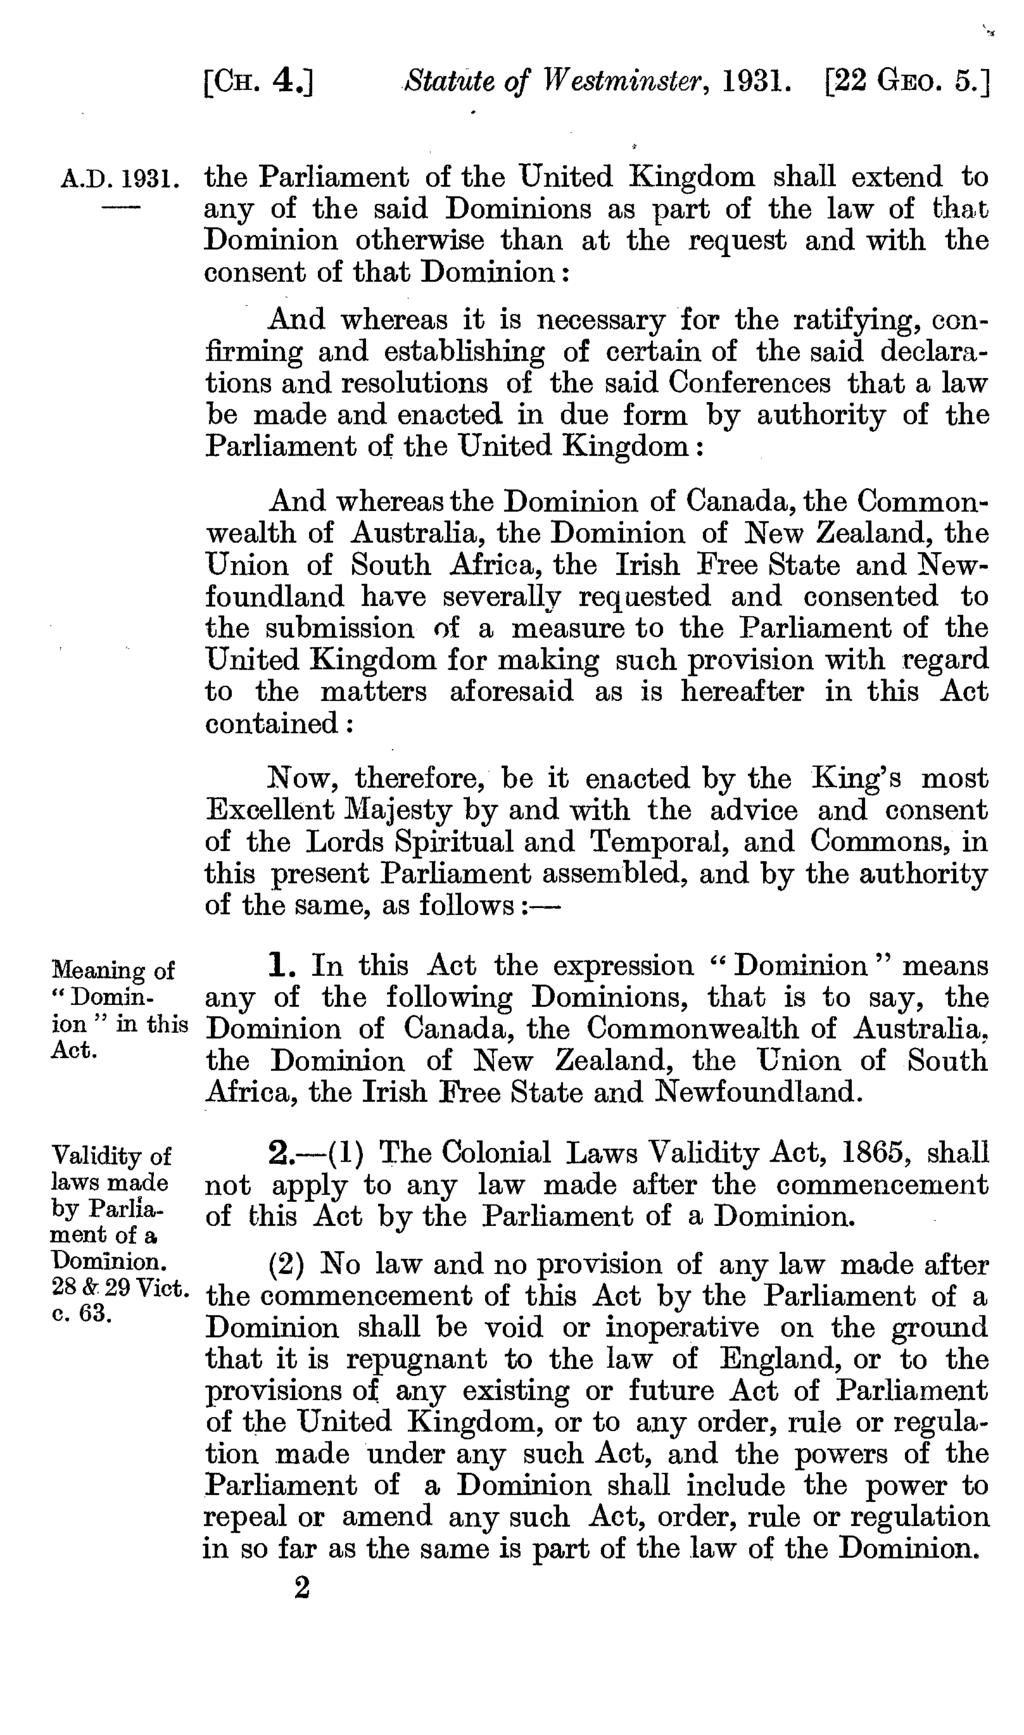 [Cx. 4.] Statute of Westminster, 1931.